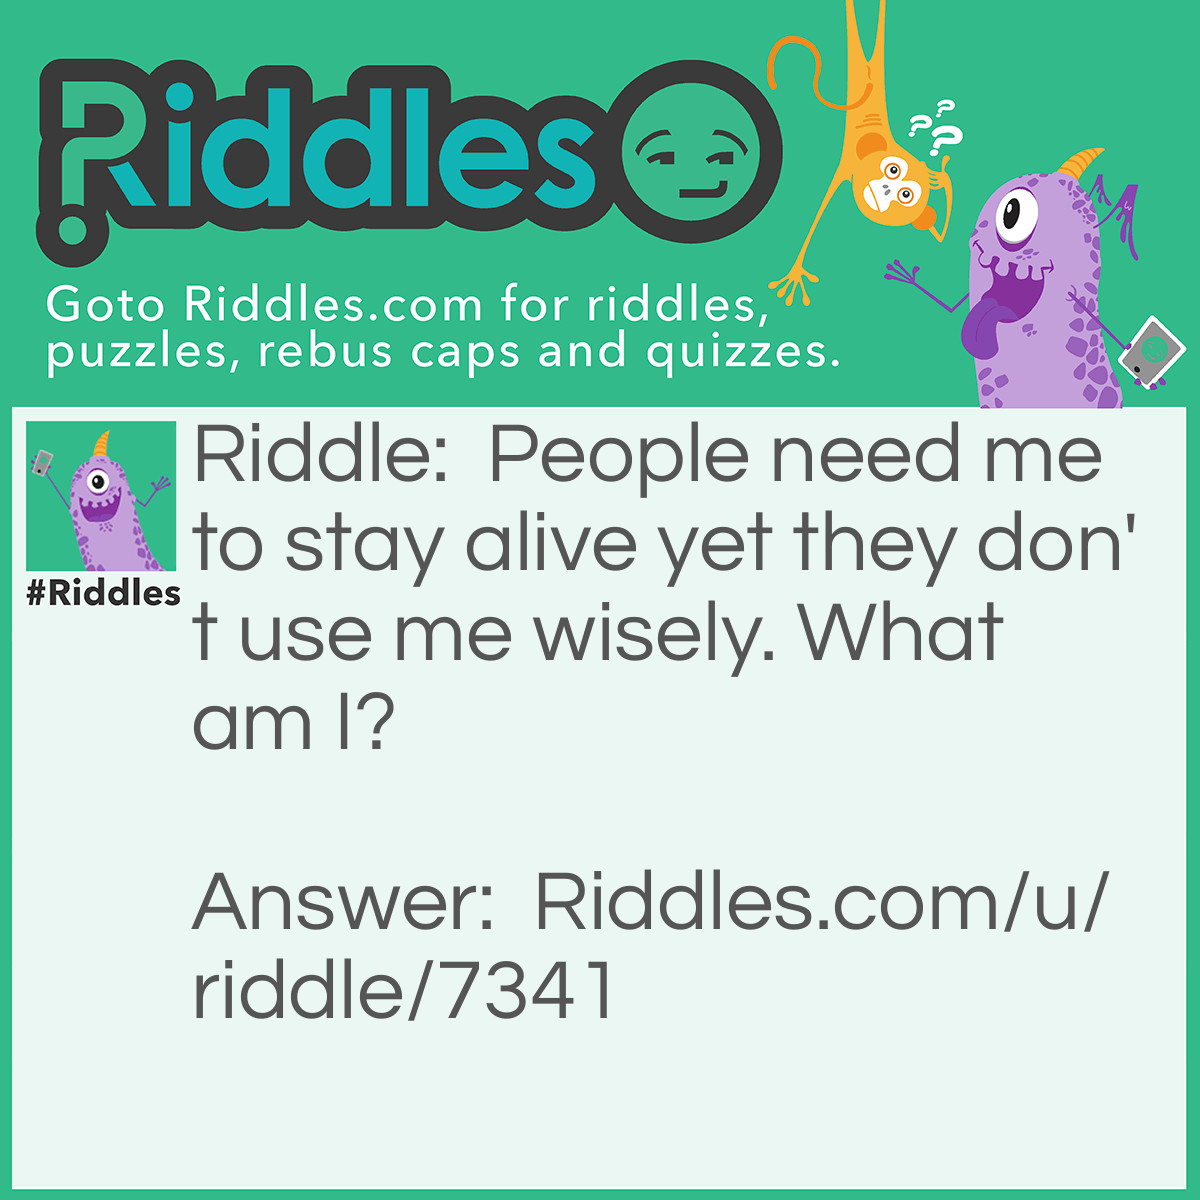 Riddle: People need me to stay alive yet they don't use me wisely. What am I? Answer: Water